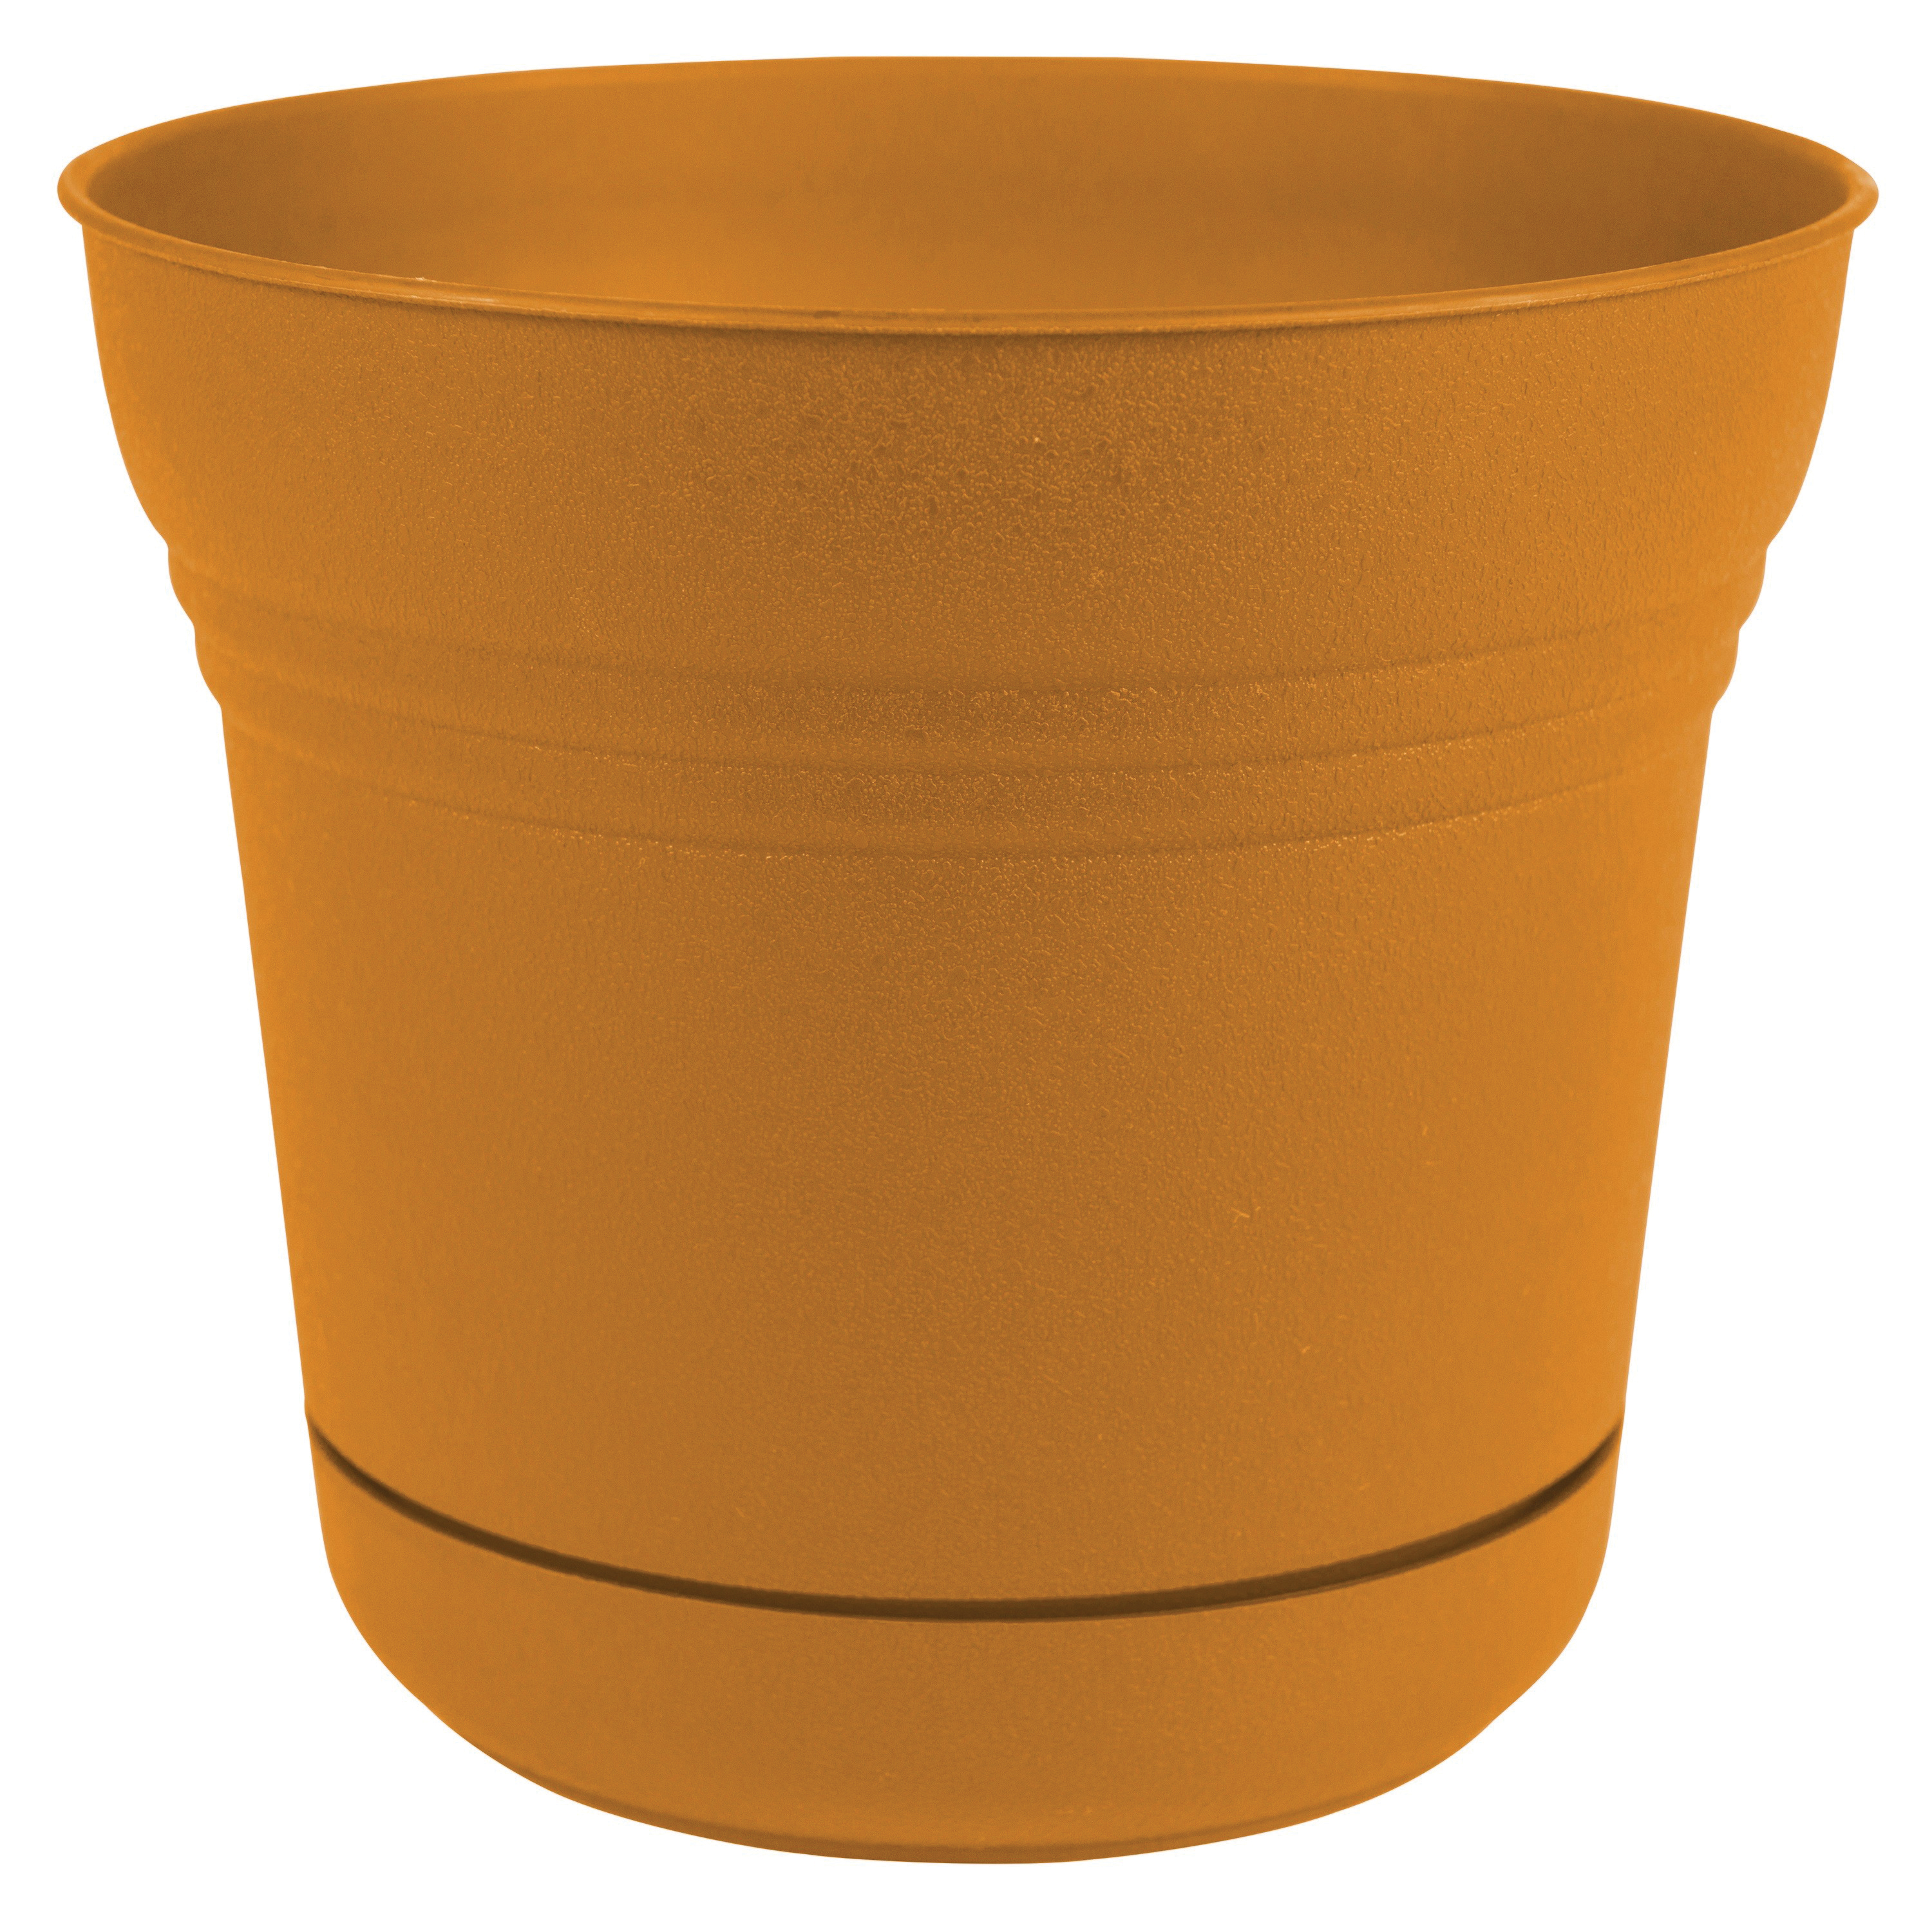 SP1423 Planter with Saucer, 12.8 in H, 14-1/2 in W, 14-1/2 in D, Round, Classic Textured Design, Plastic, Matte